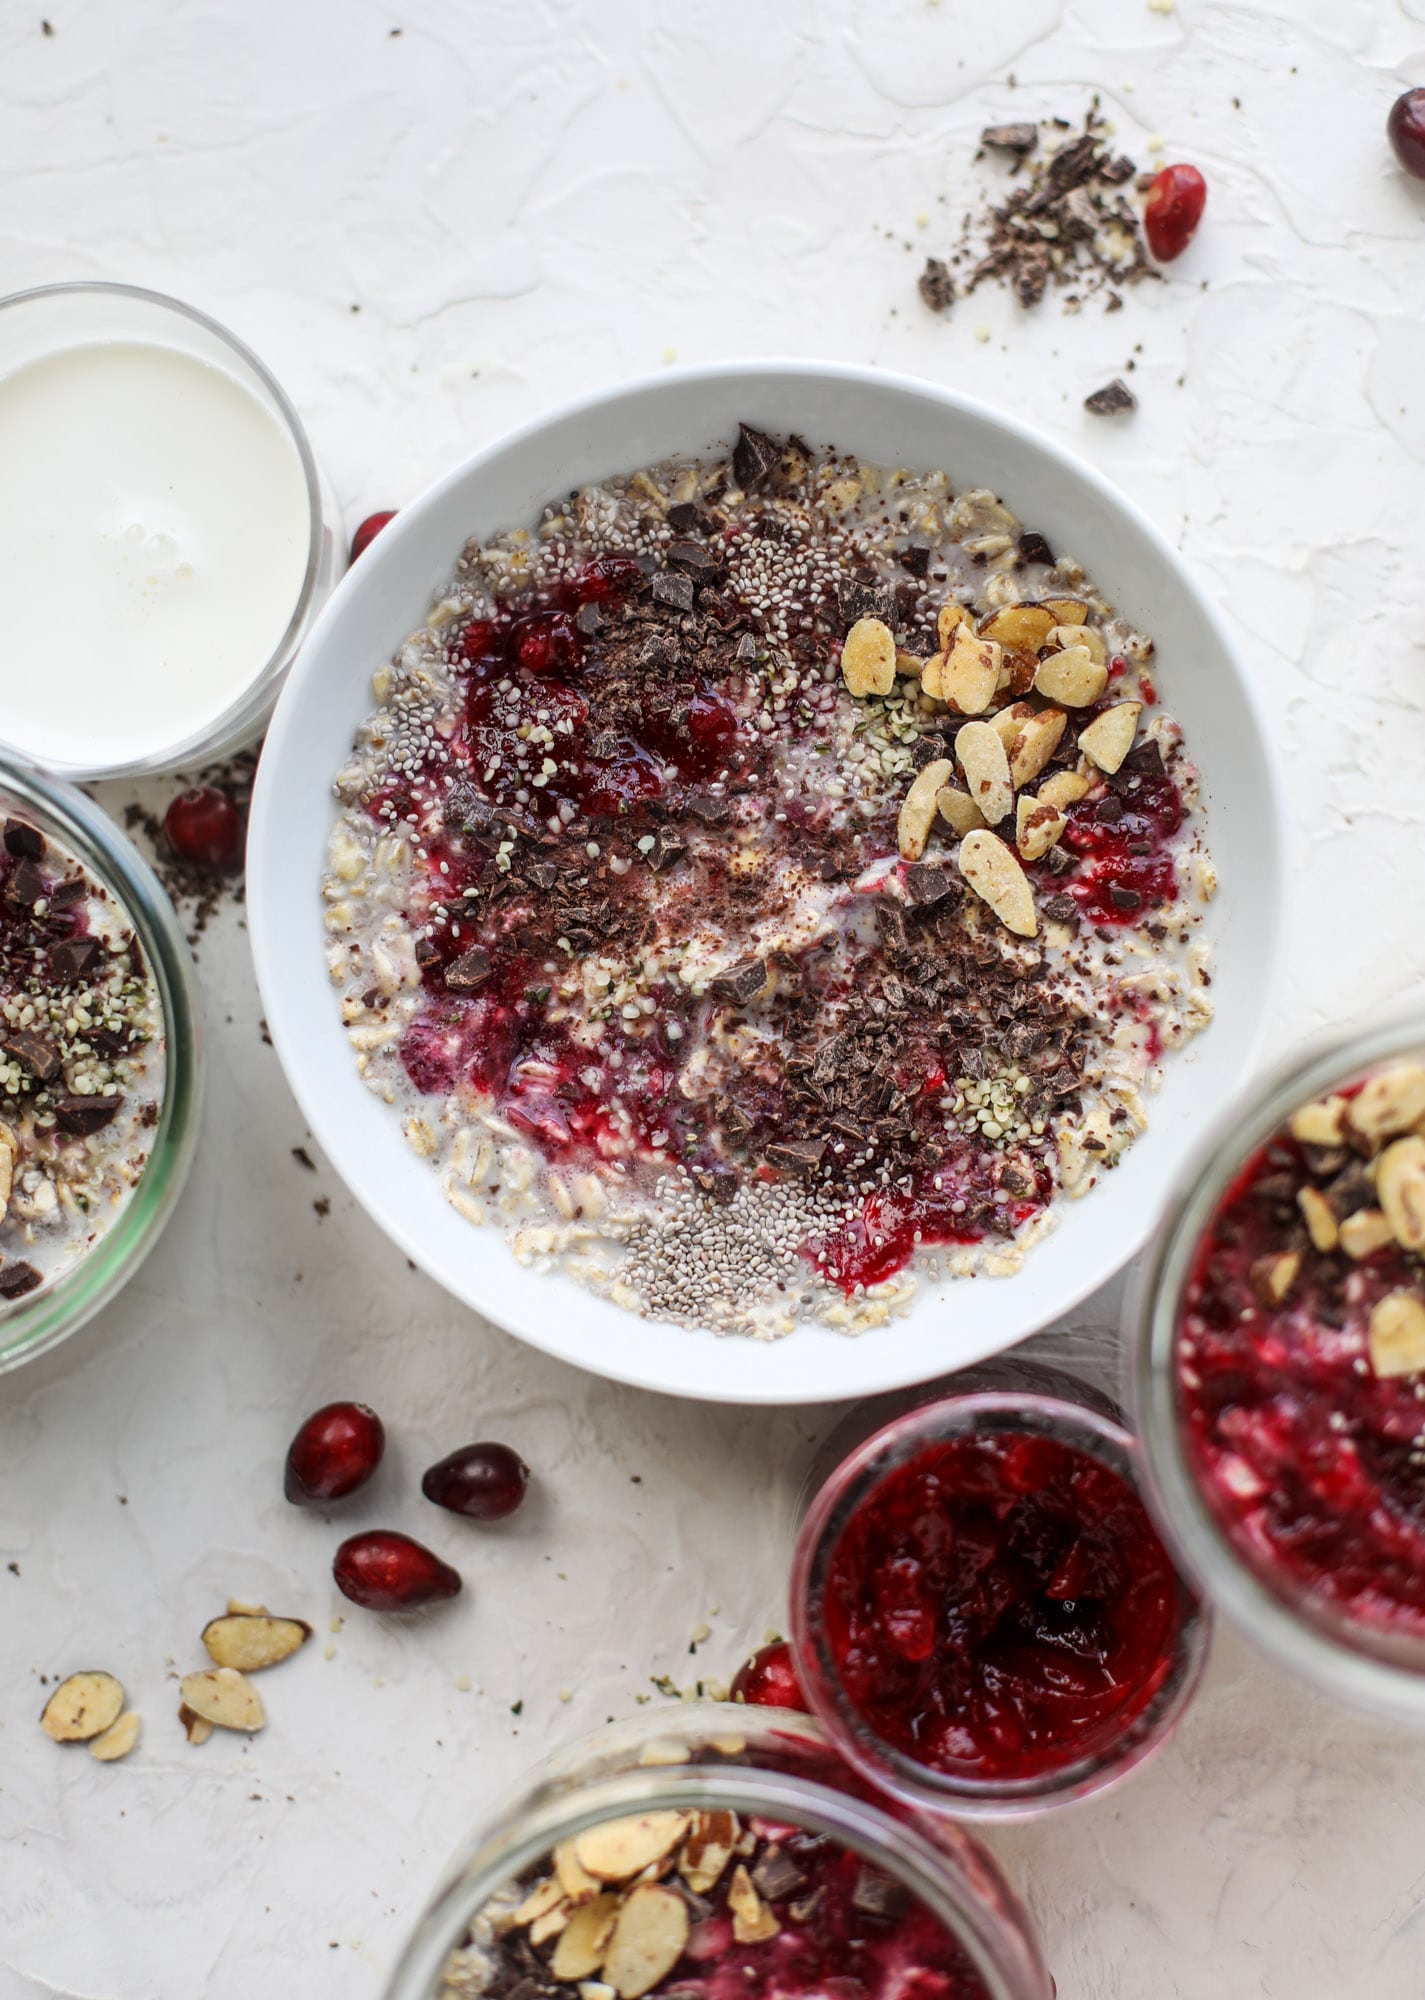 These leftover cranberry overnight oats are the perfect post-Thanksgiving breakfast! Leftover cranberry sauce and dark chocolate come together to flavor chewy, chilled overnight oats. Add on sliced almonds, chia seeds and hemp hearts for more deliciousness! I howsweeteats.com #overnight #oats